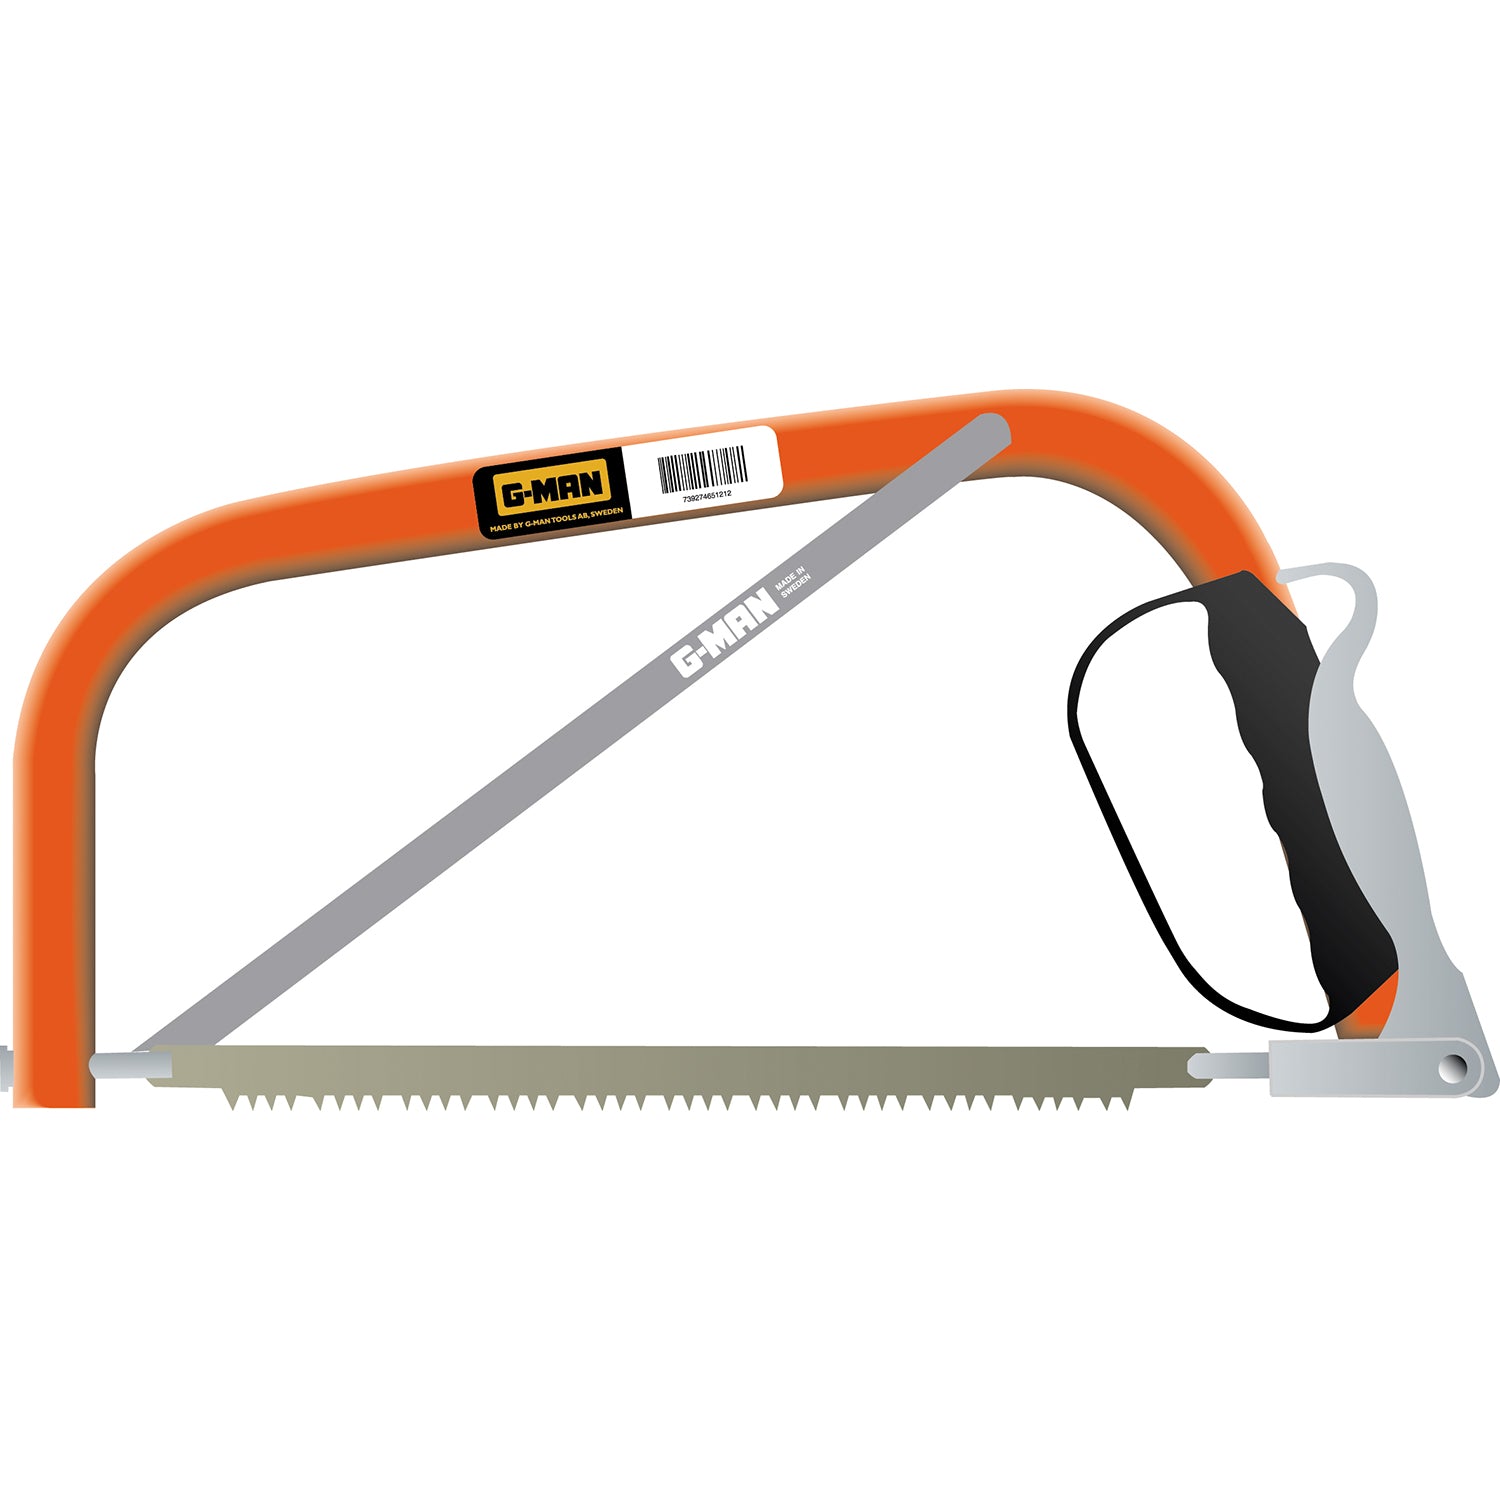 G-Man 2-In-1 Hacksaw/Bowsaw Hand Tools - Cleanflow